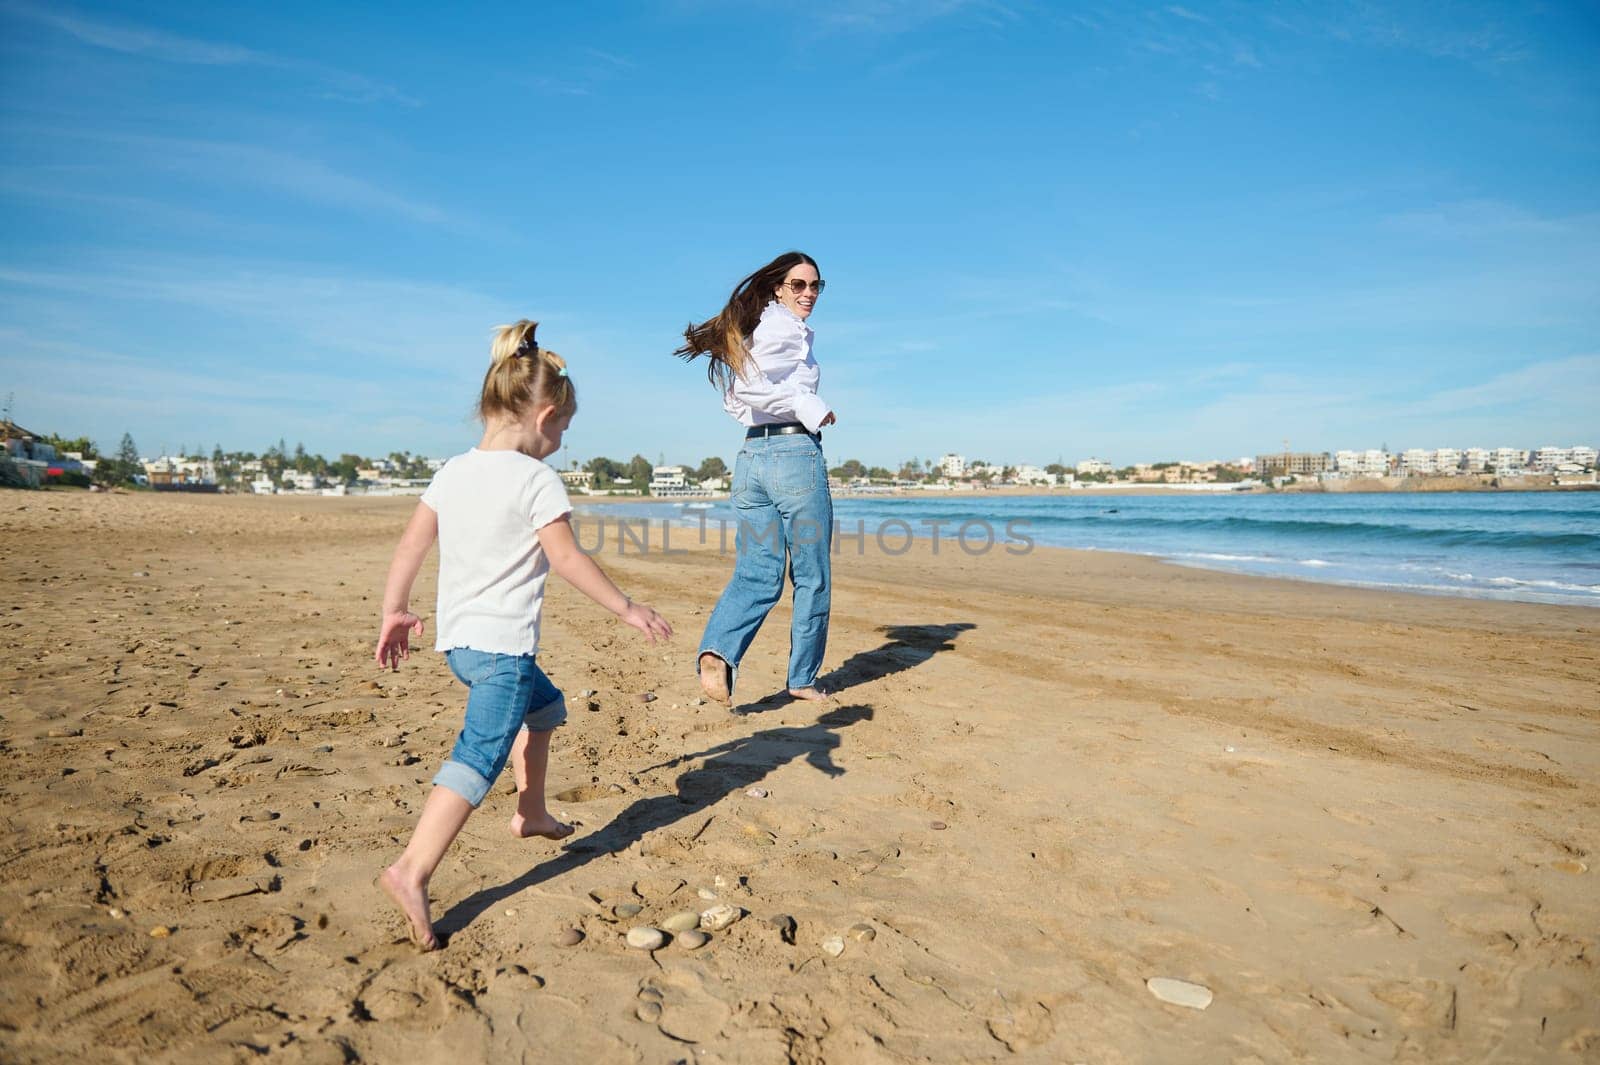 Rear view of a happy young woman, loving mother and her little daughter, playing together on the beach, running barefoot and leaving footsteps on the wet sand, enjoying a happy moments together